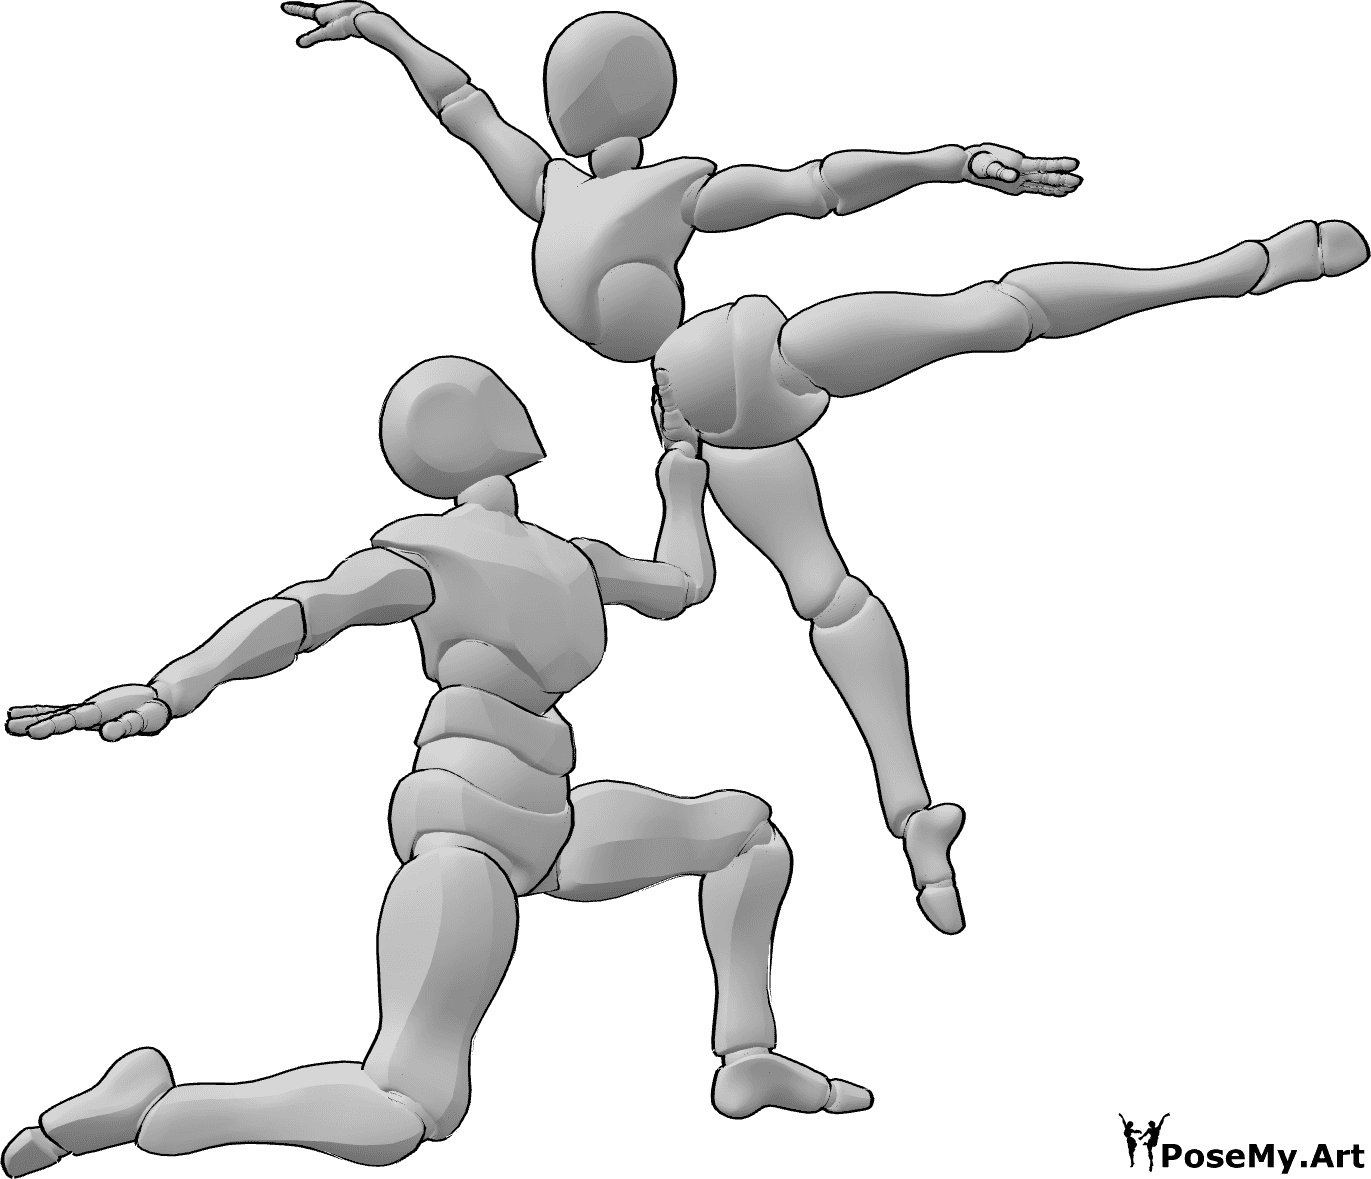 Pose Reference - Ballet lifting up pose - Female and male are dancing ballet, male is lifting the female up